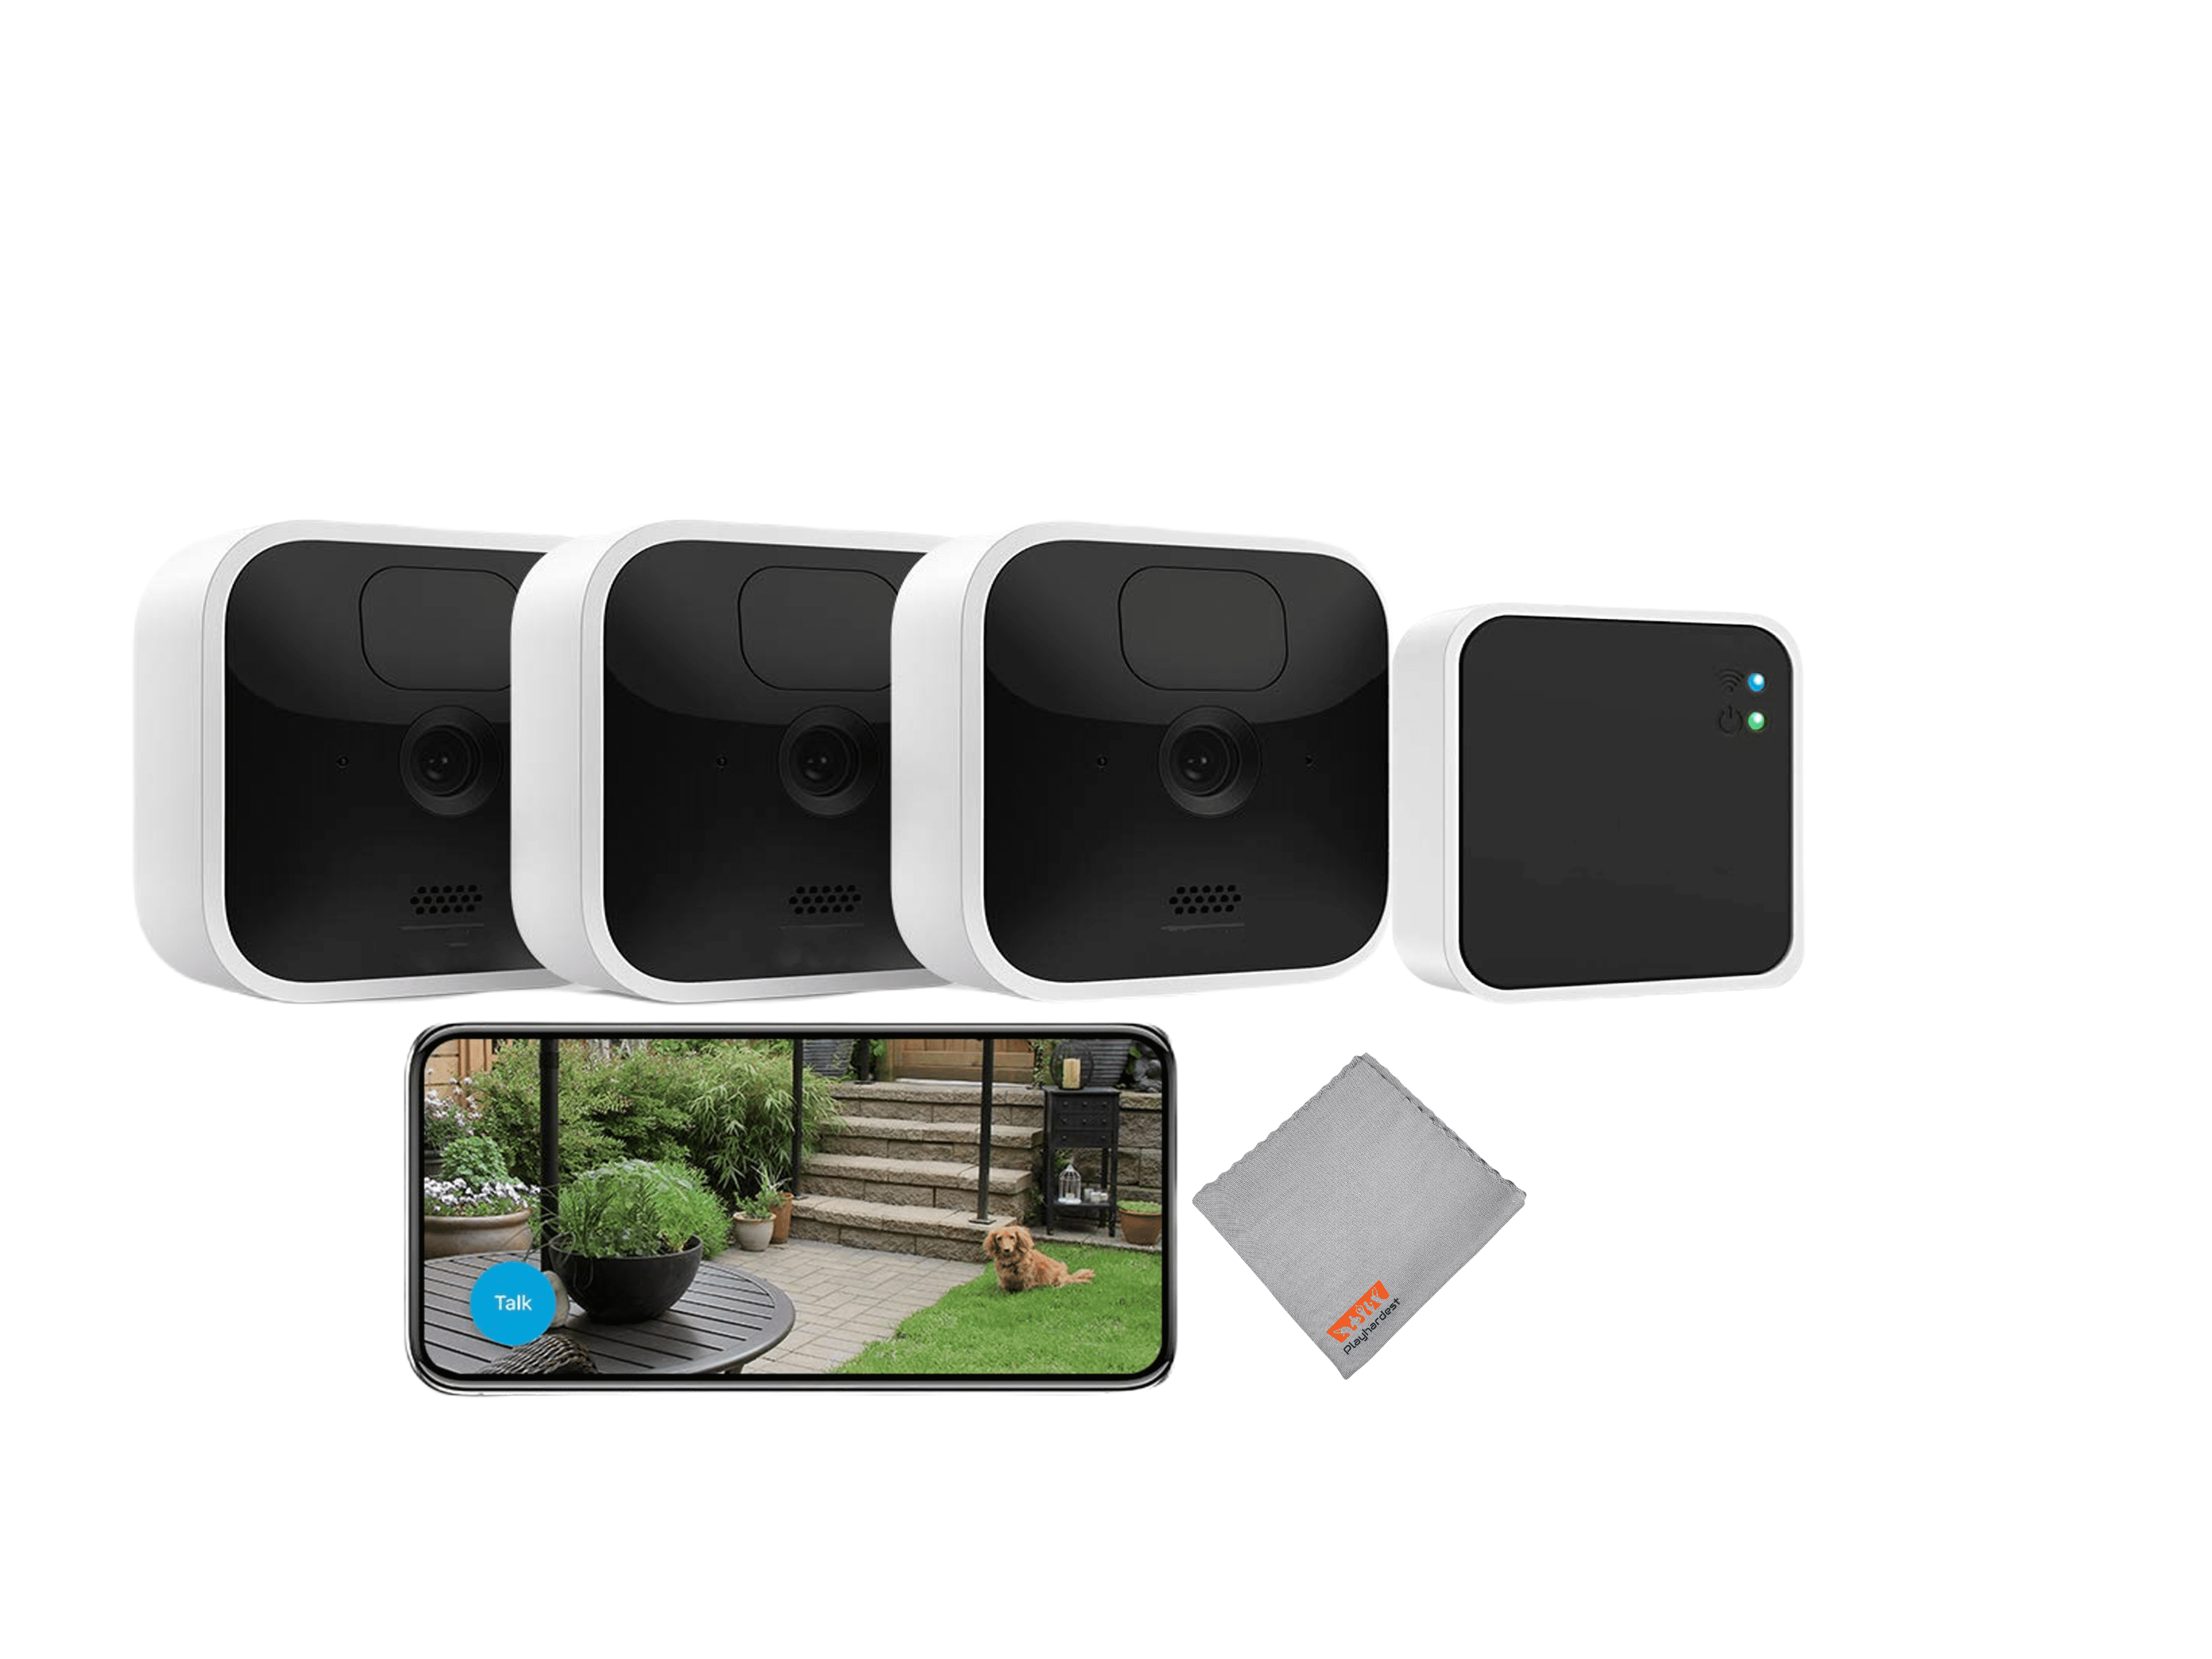 Blink Outdoor 4 Wireless 1080p Security System in Black (Set of 5)